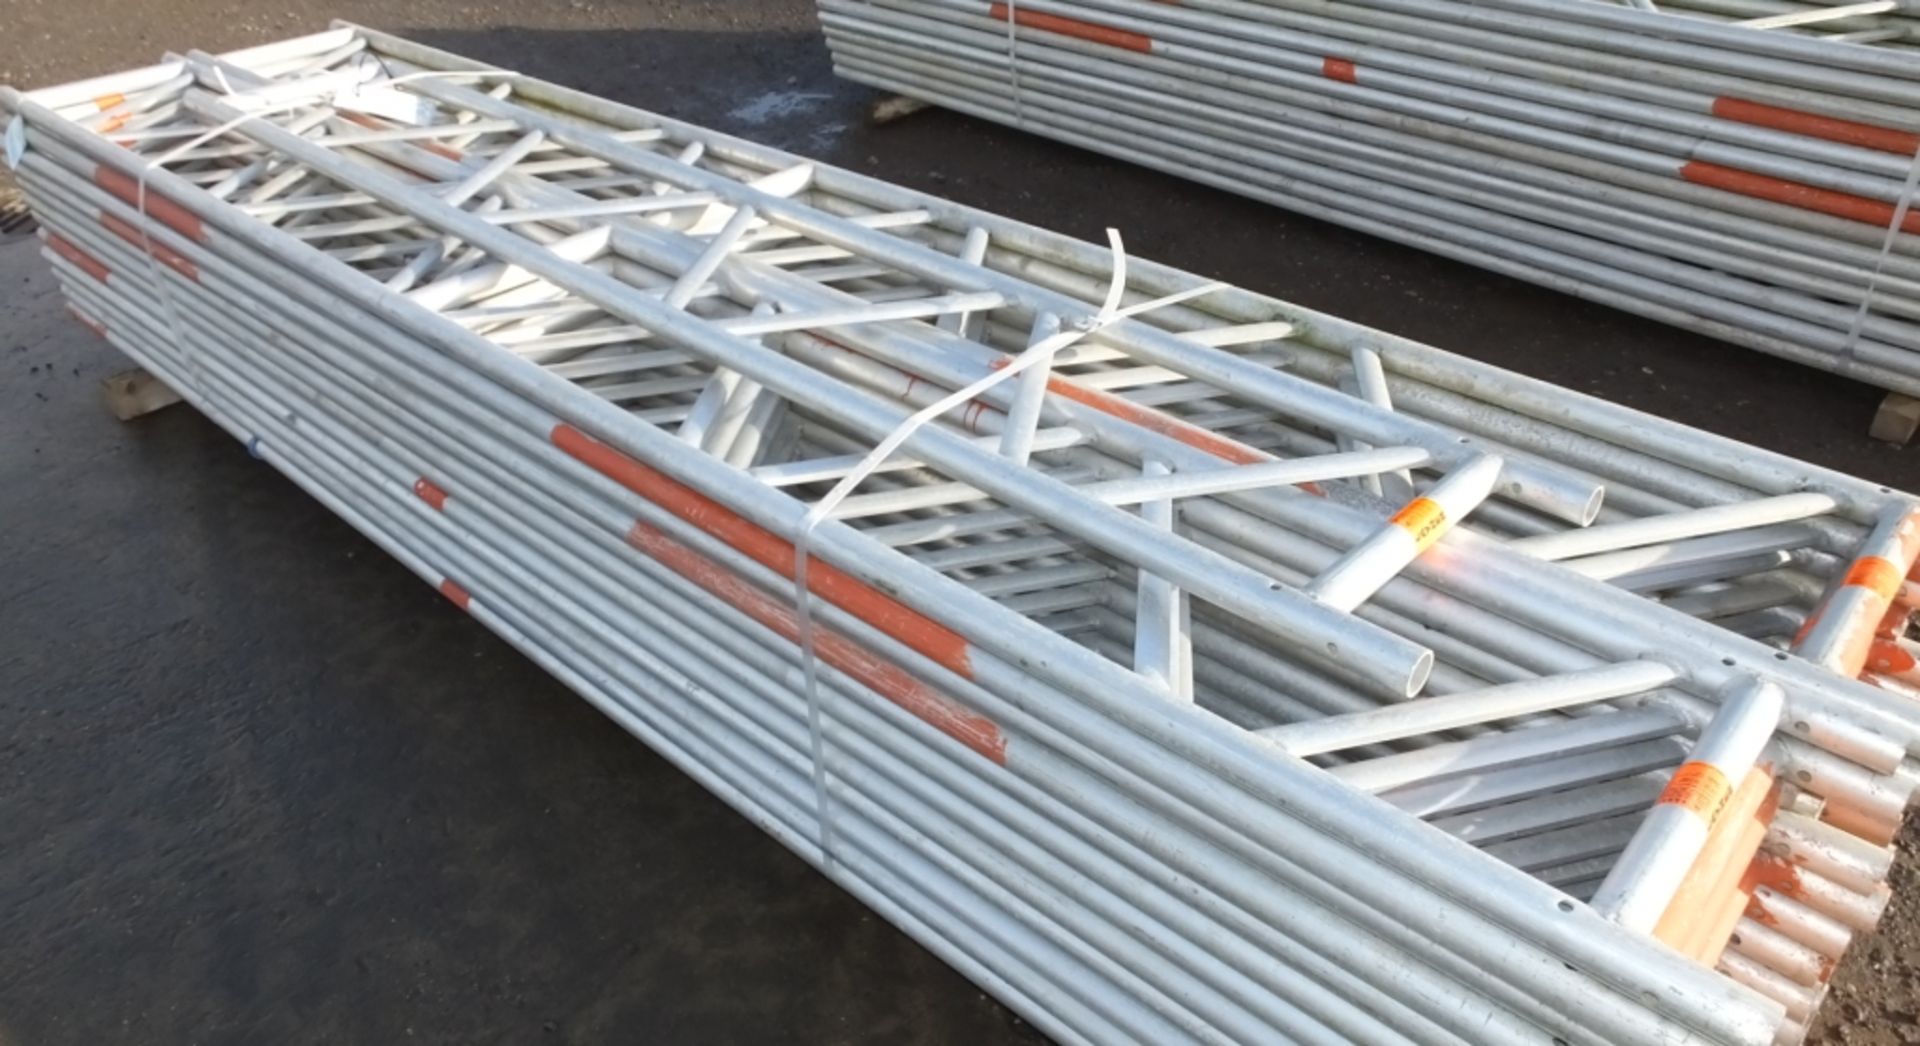 24x 4M Layher Ladder Beams - Staging Board sections - Unit Beam SS400 8.0M, 1x 3M Layher L - Image 4 of 5